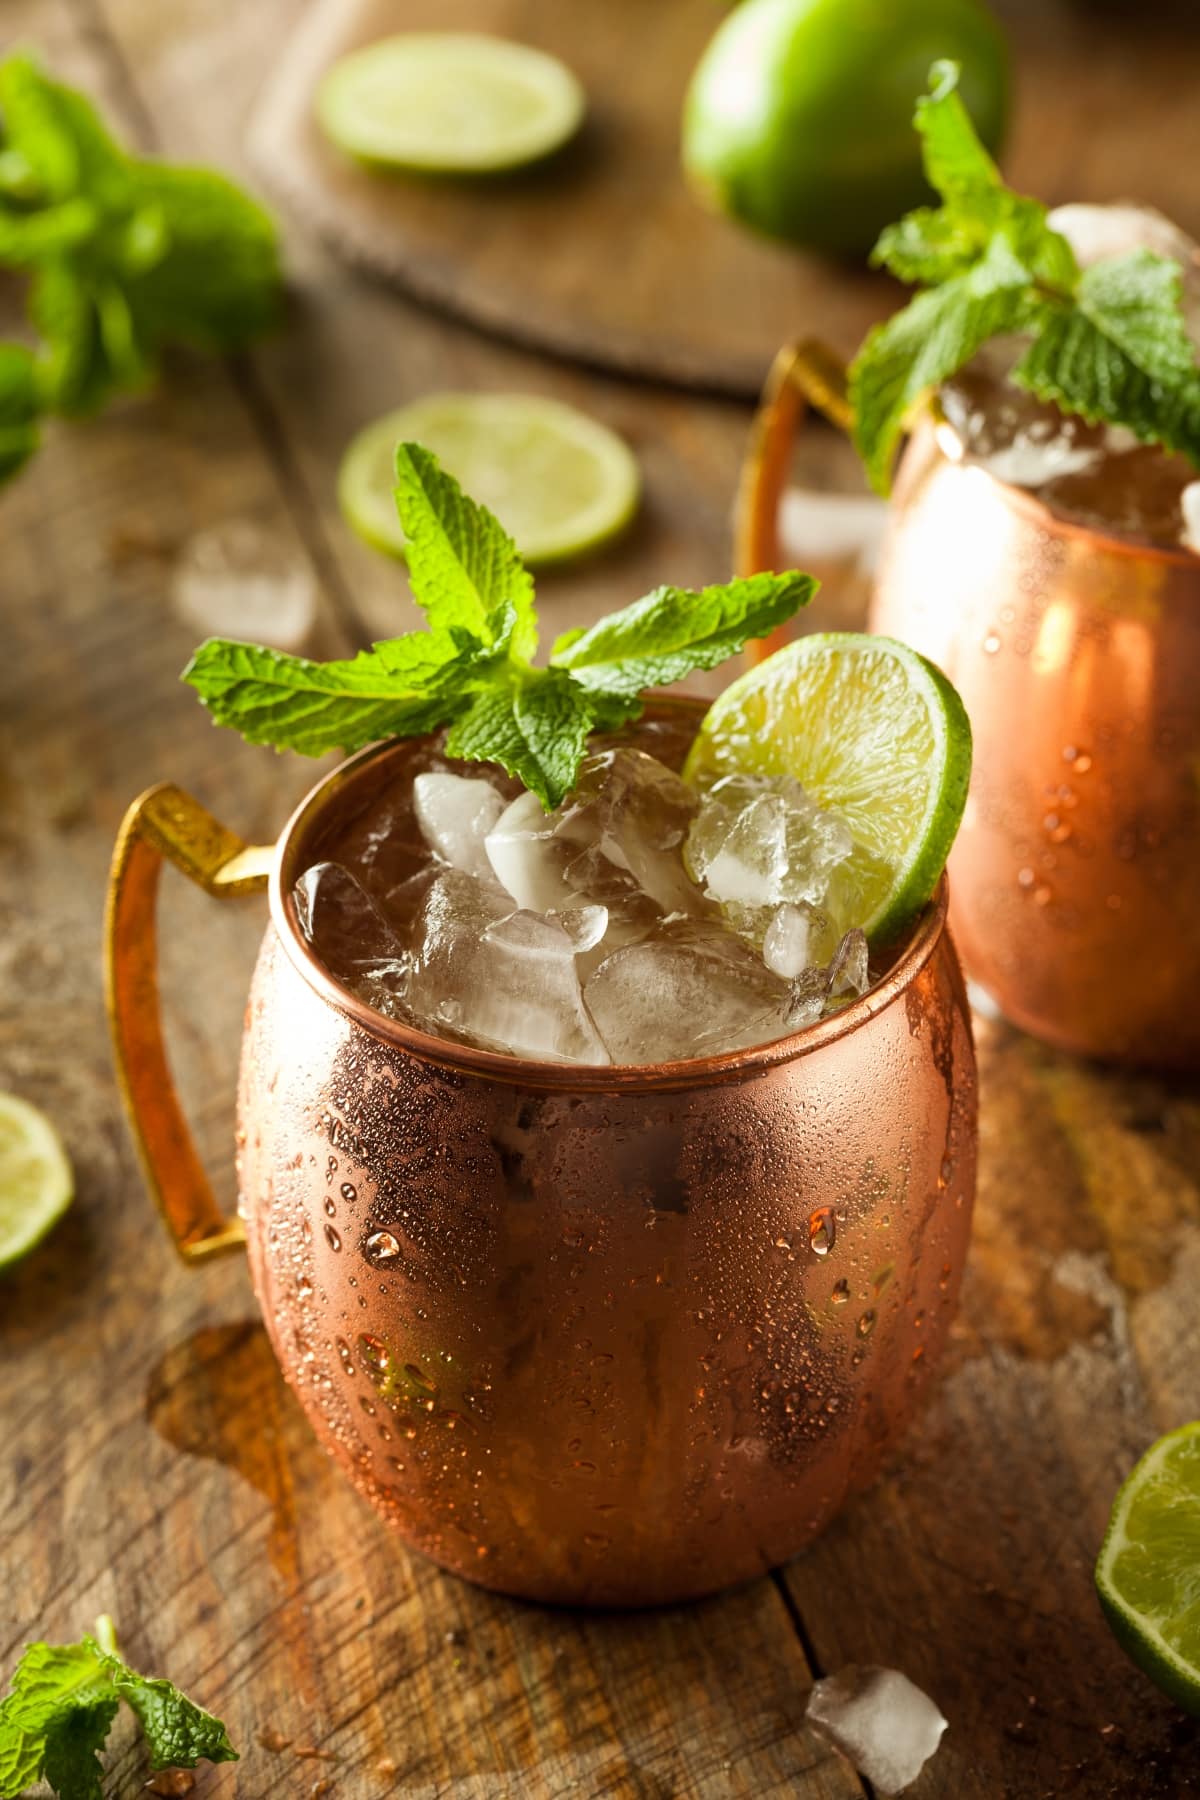 Moscow mule cocktail on ice garnished with lime wheel.